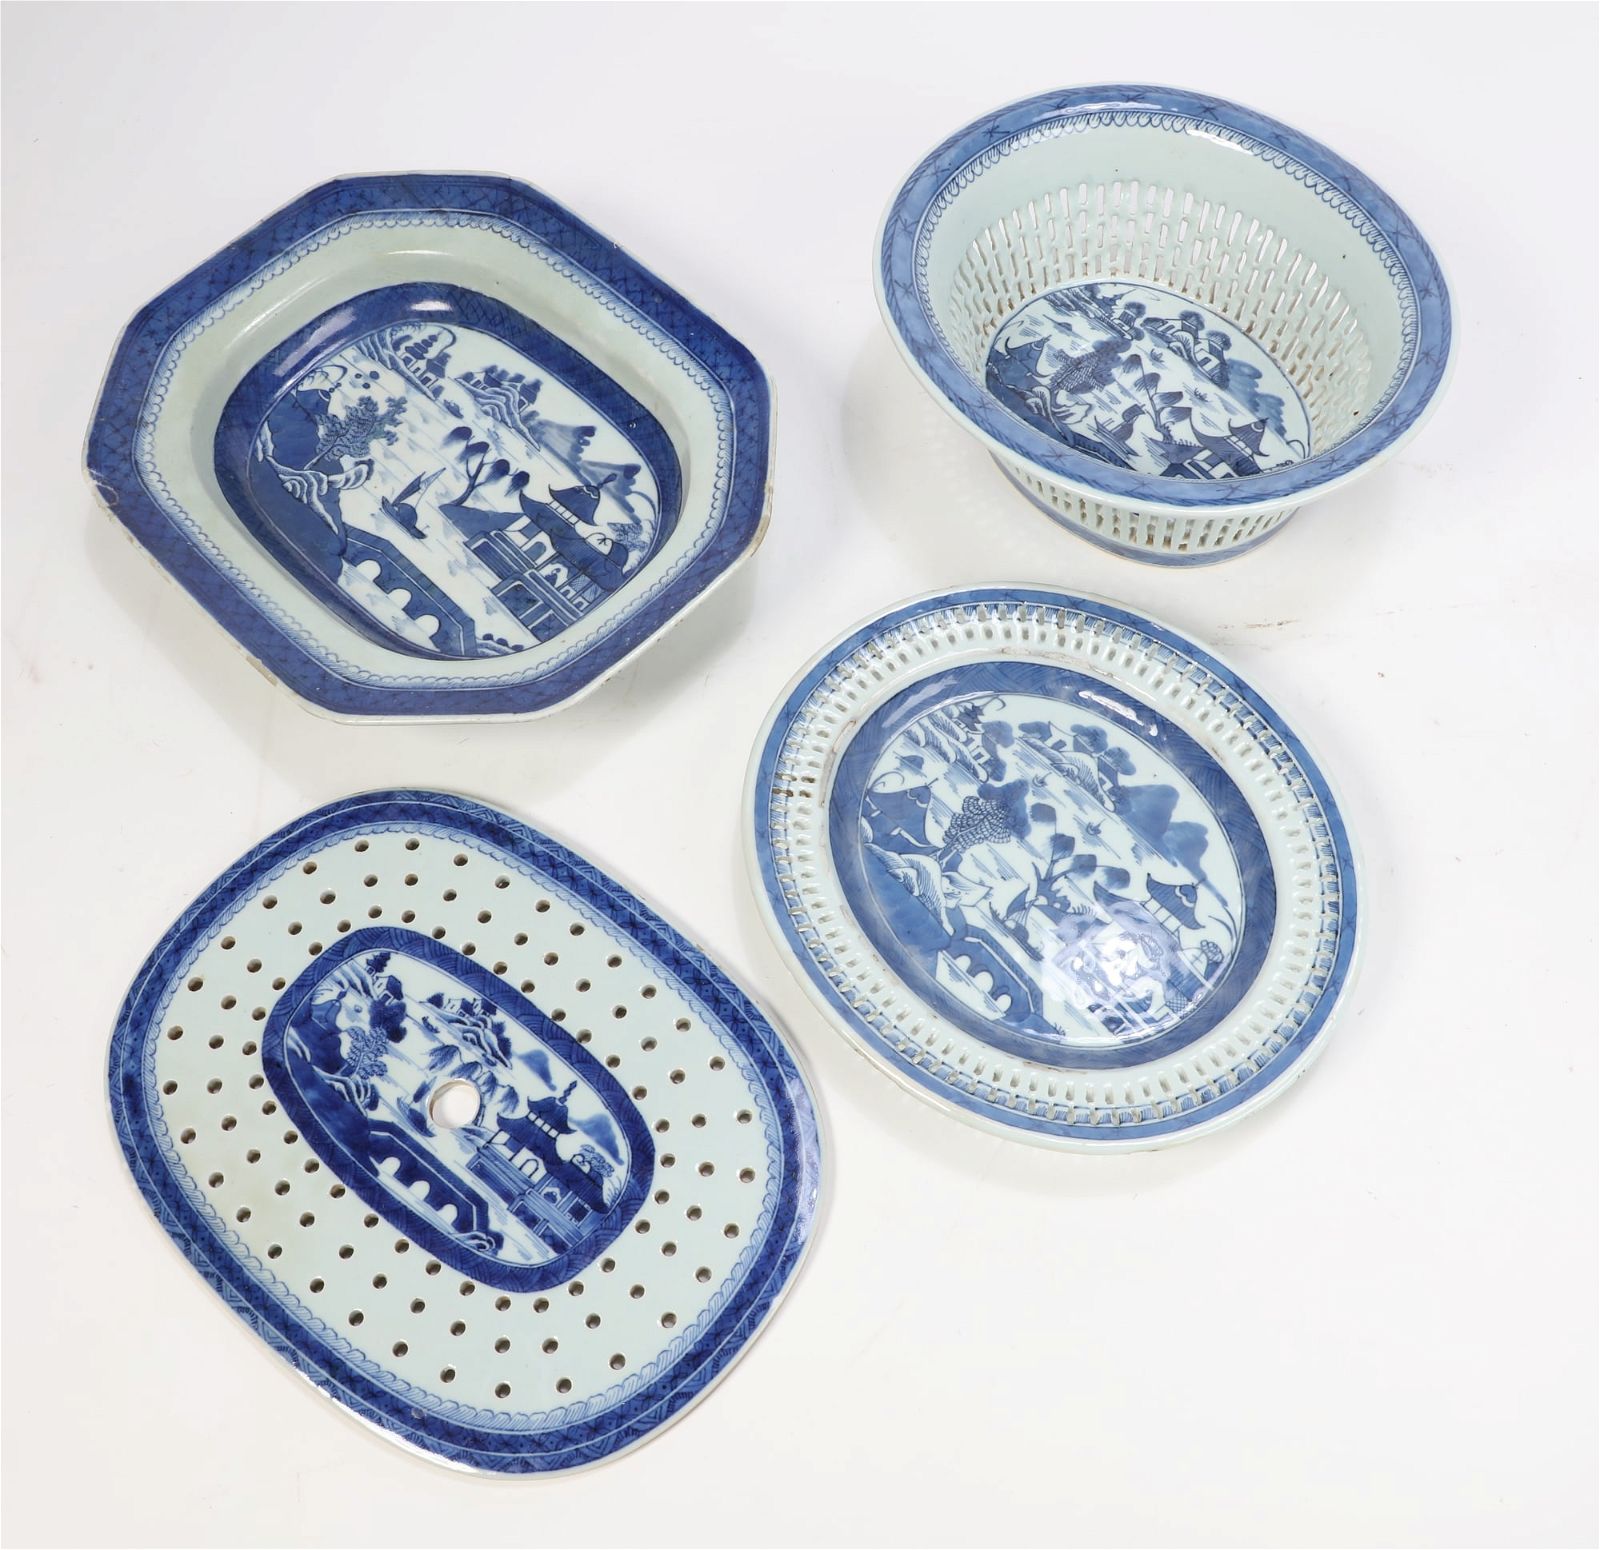 FOUR CHINESE EXPORT PORCELAIN SERVING